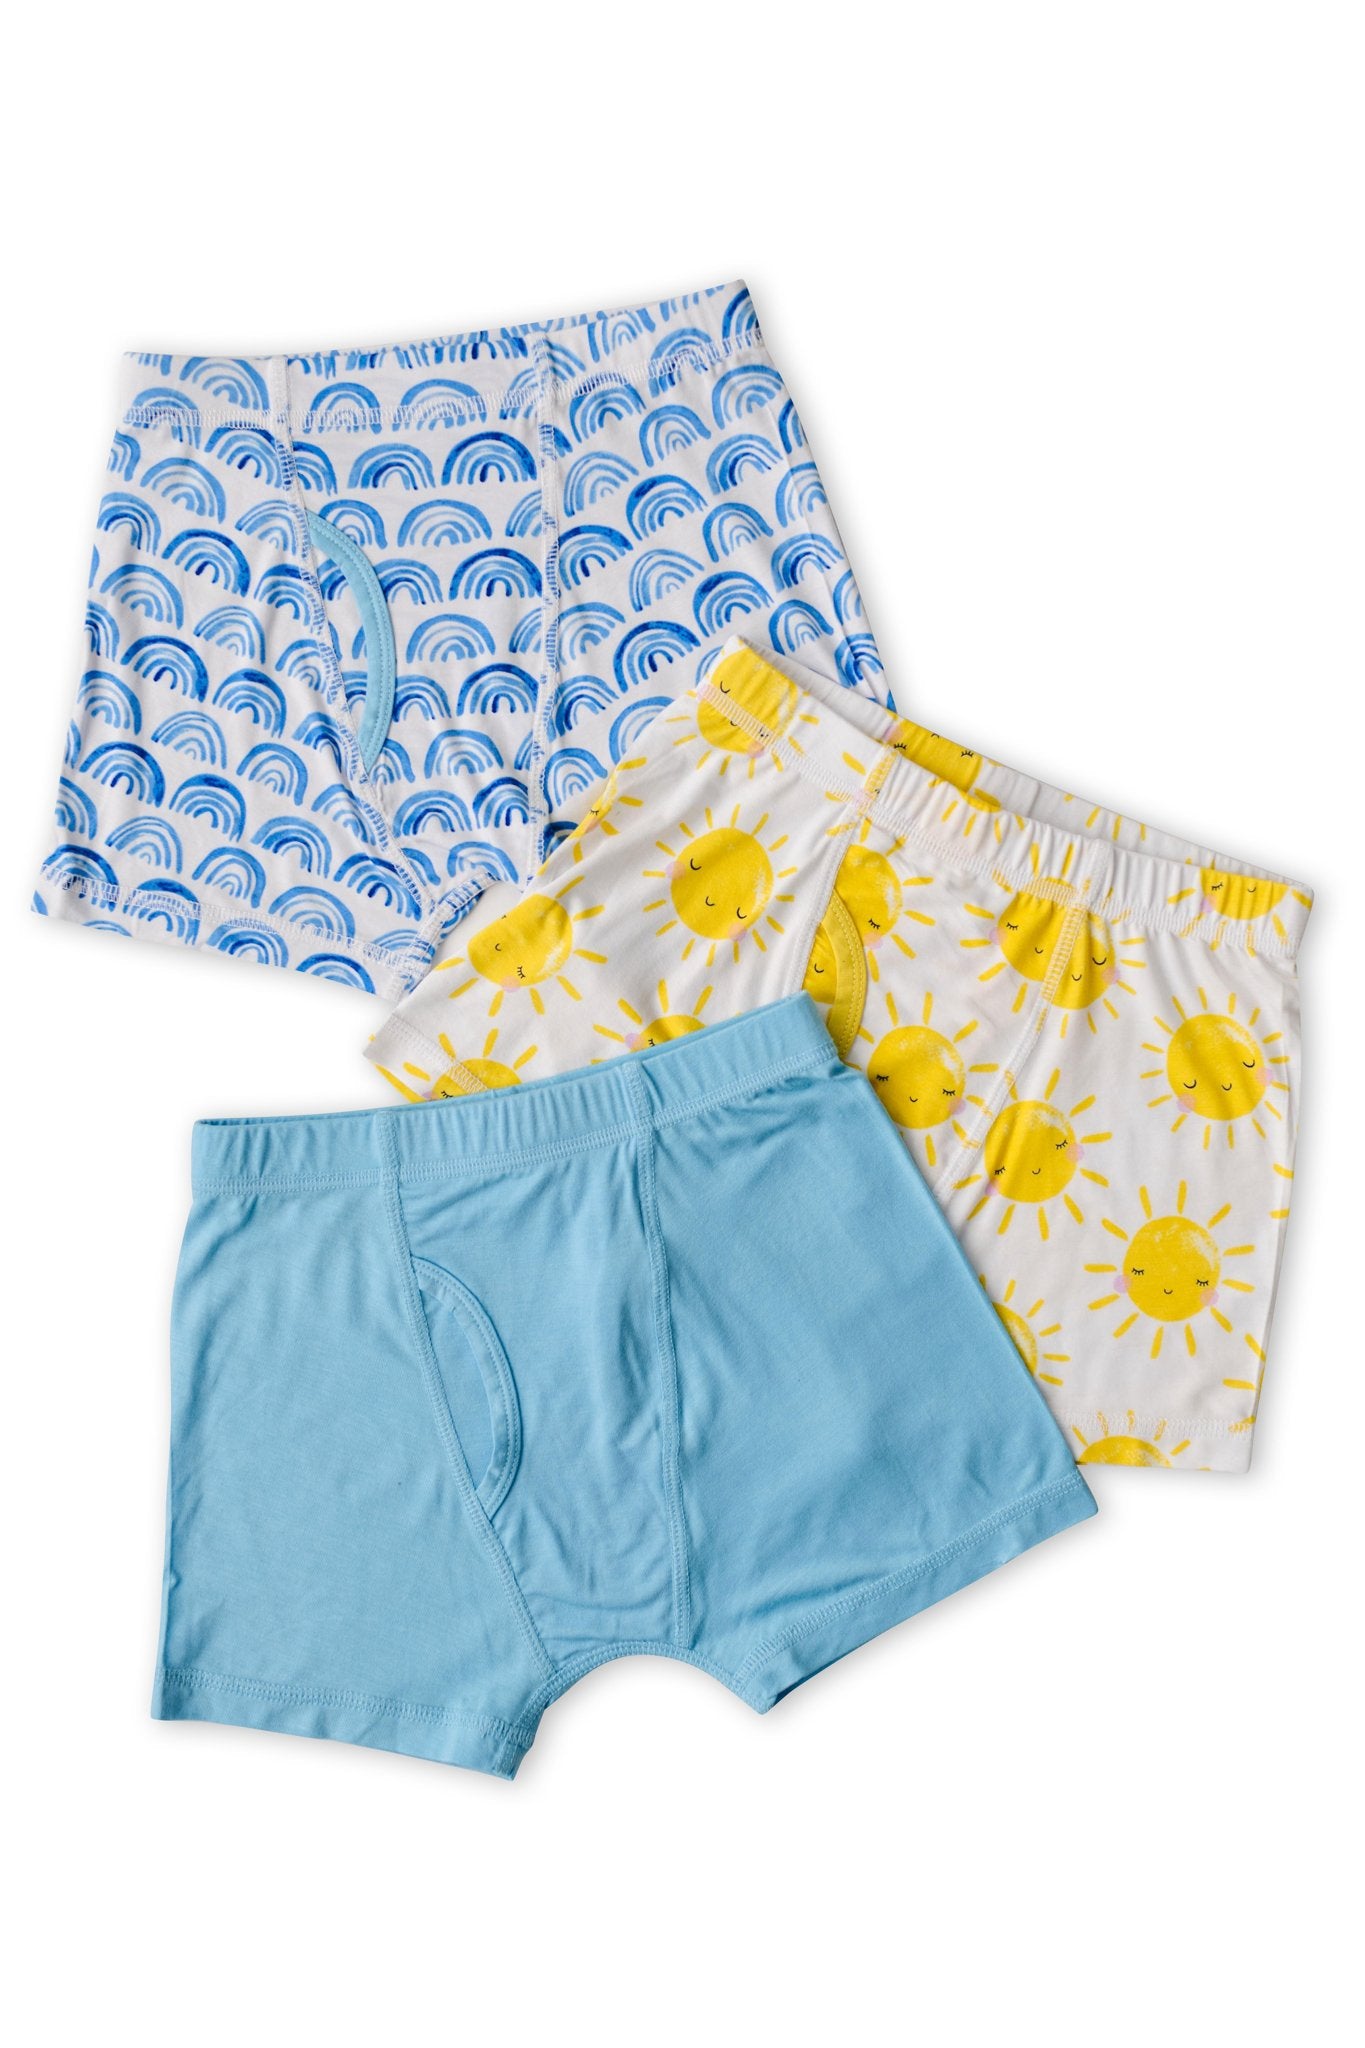 Bamboo Boys Briefs (blue/flint/sand) - Vancouver's Best Baby